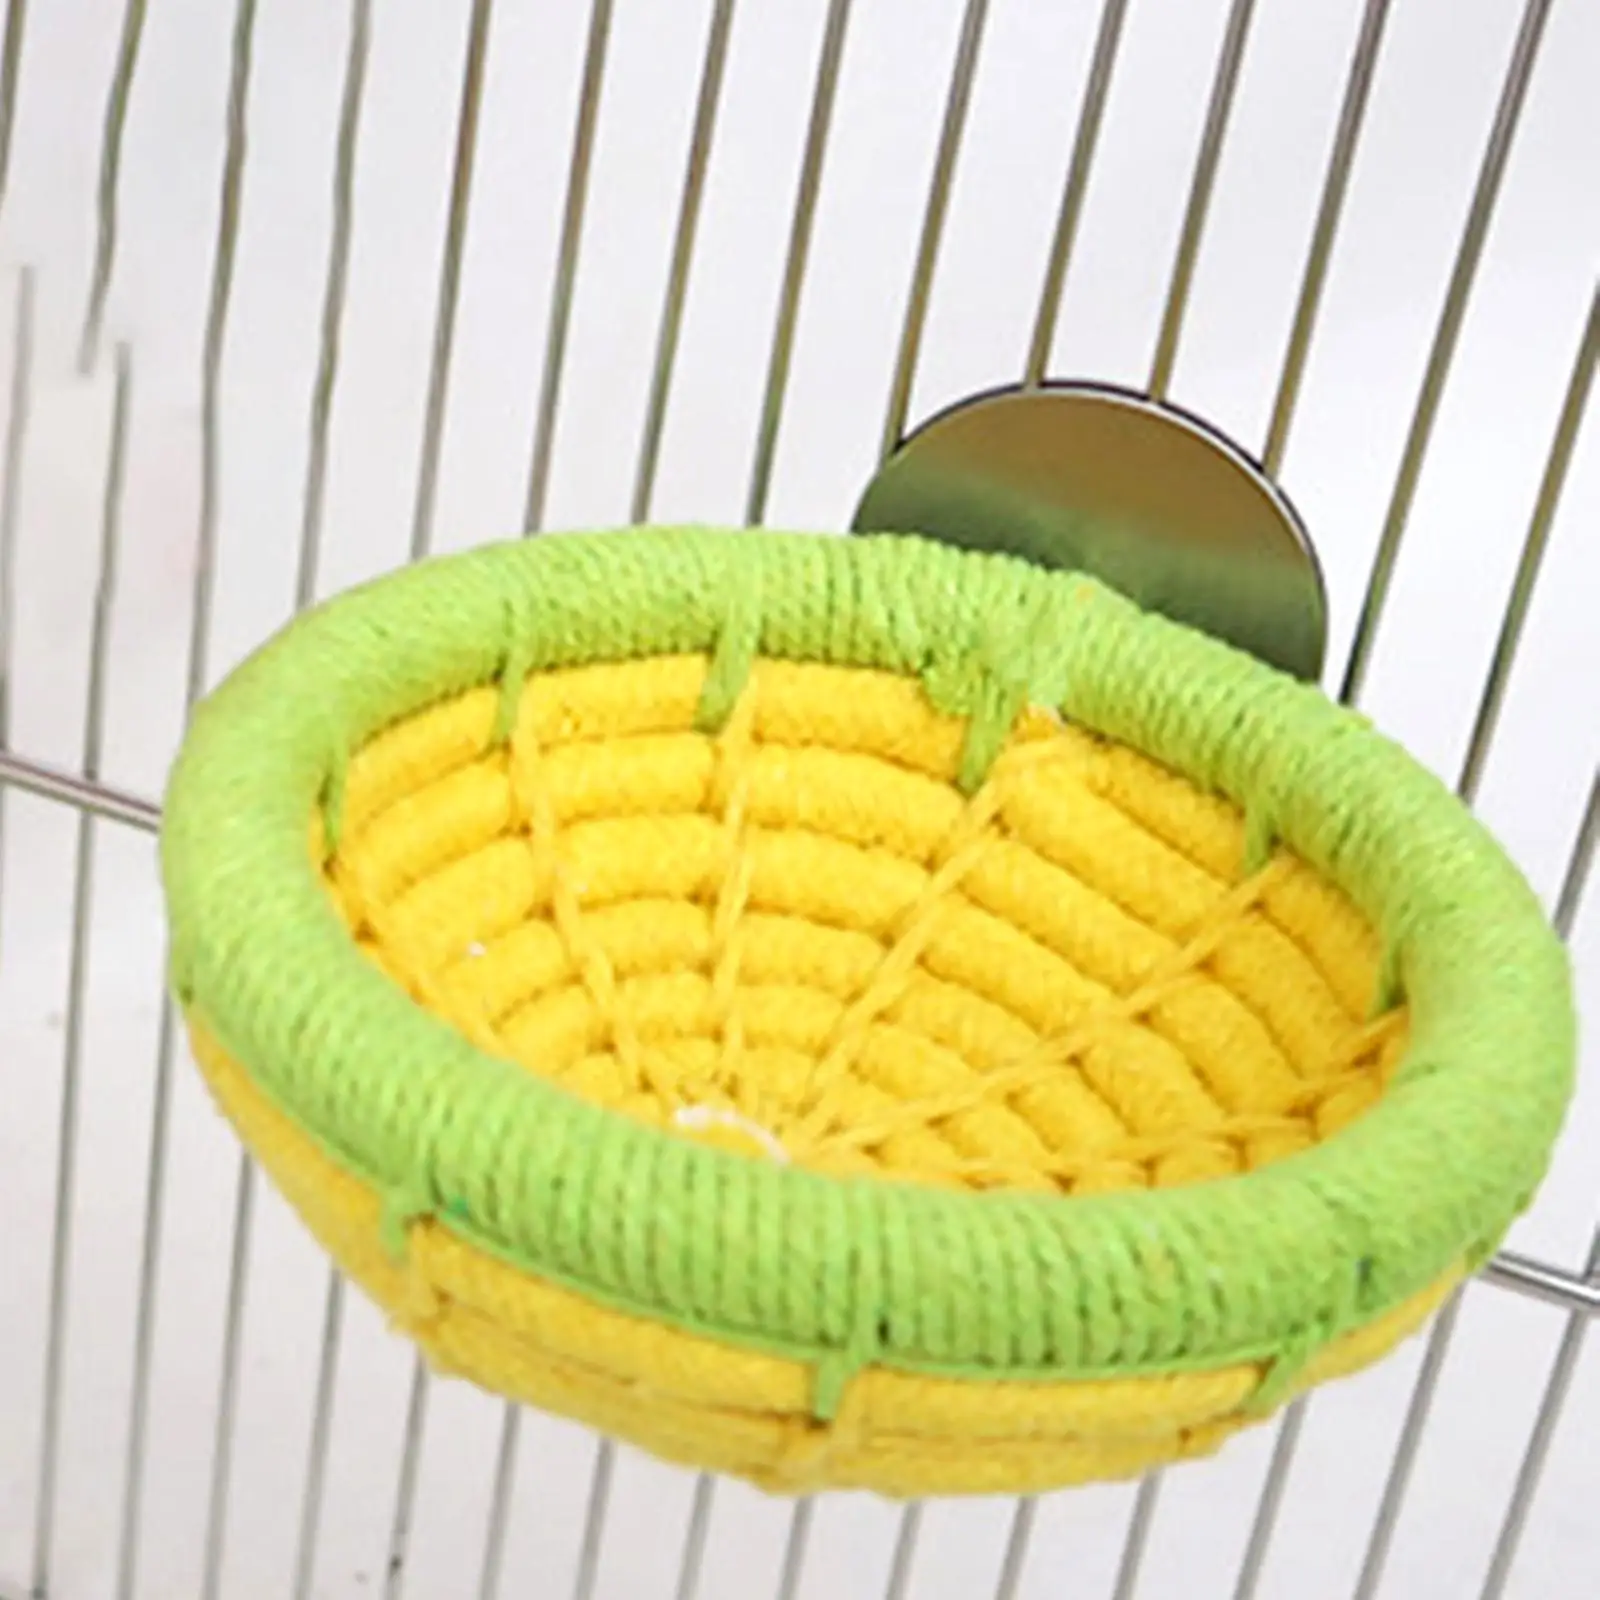 Pet Bird Nest Hanging Sleeping Bed Cotton Rope Cave Cage Toys Soft Bird House Hut for Cockatoo Parrot Lovebird Budgies Hamster